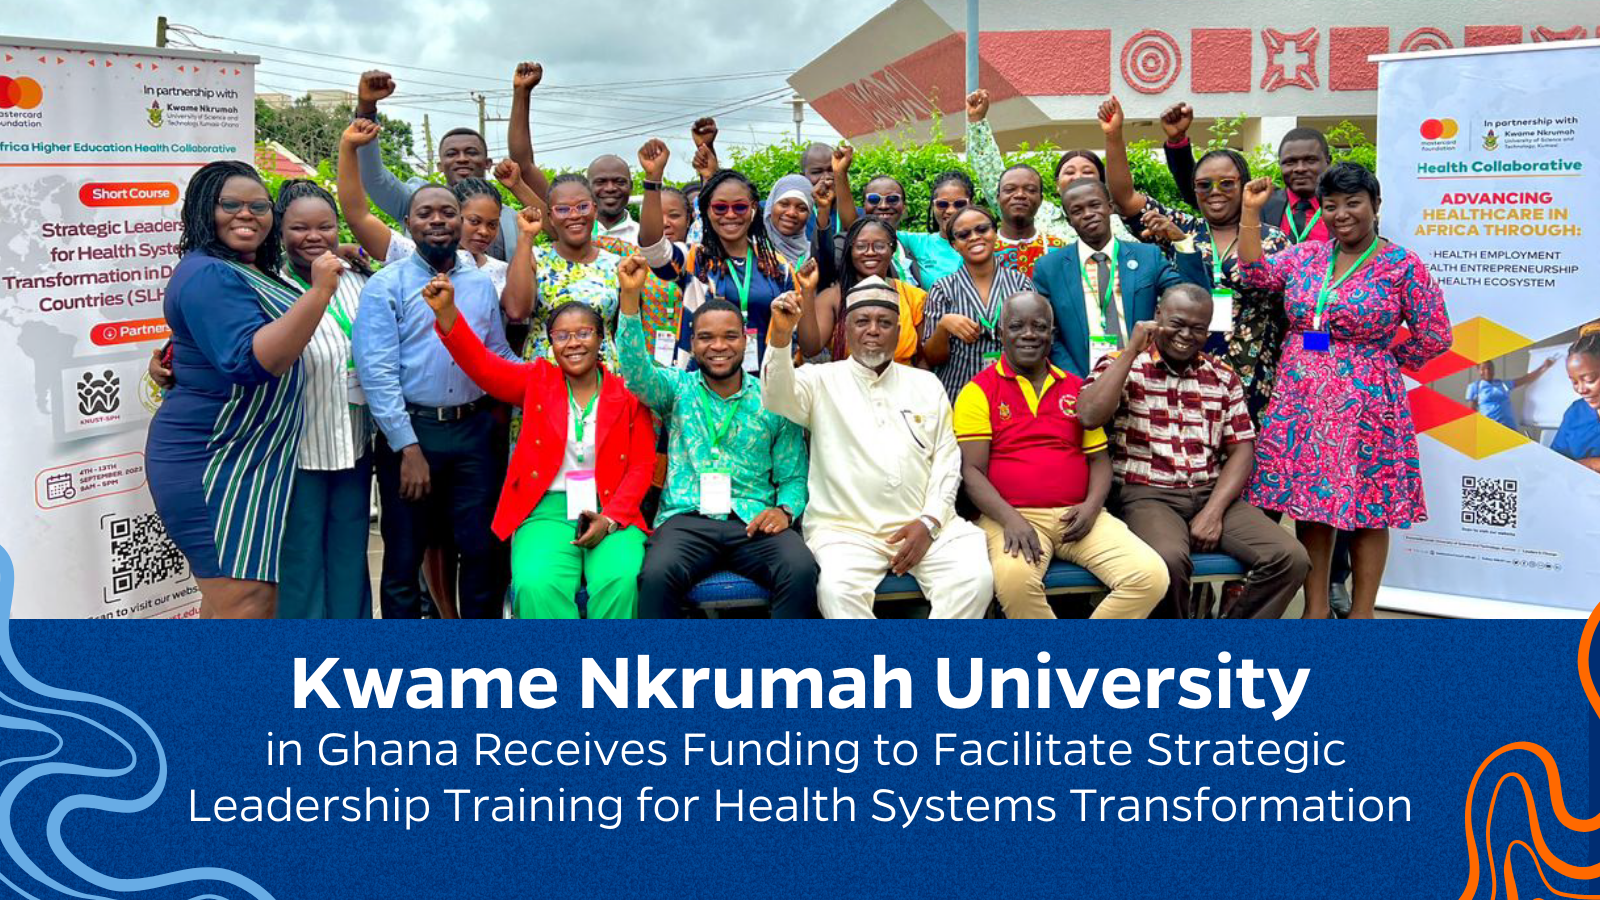 Kwame Nkrumah University in Ghana Receives Funding to Facilitate Strategic Leadership Training for Health Systems Transformation